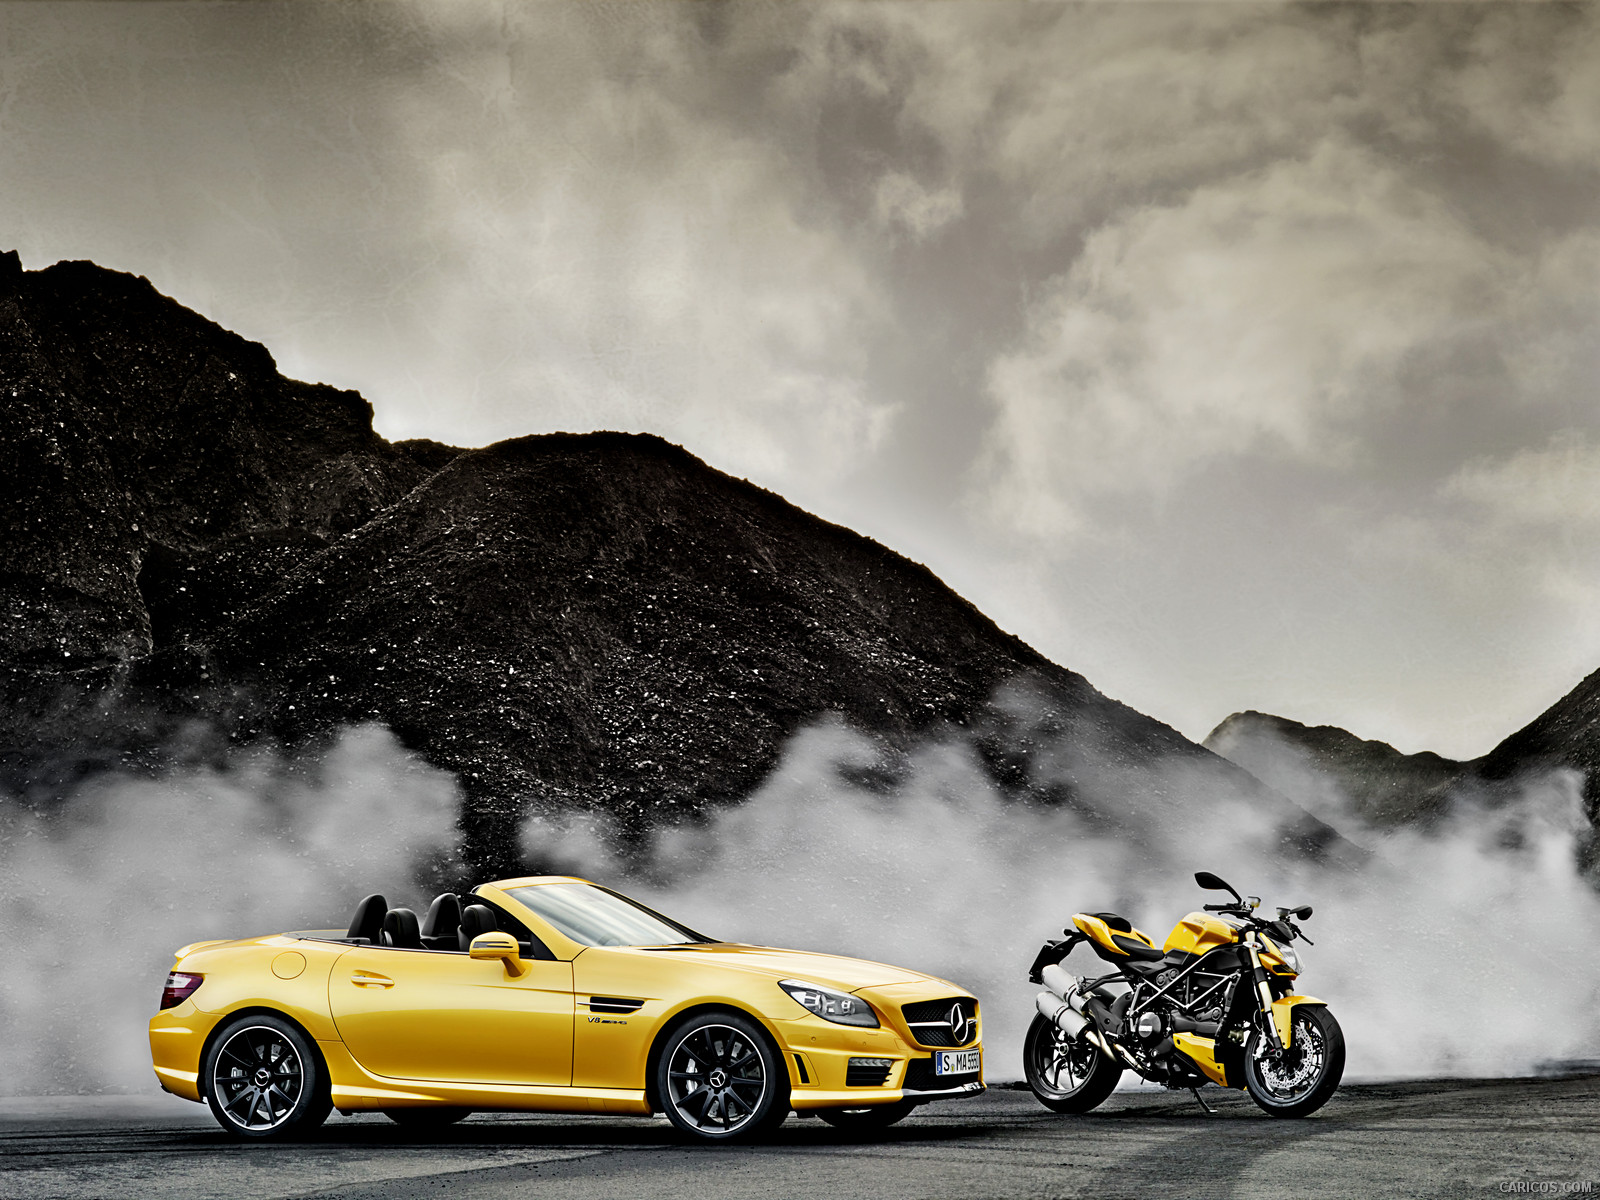 Mercedes-Benz SLK 55 AMG and Ducati Streetfighter 848 - , #43 of 47